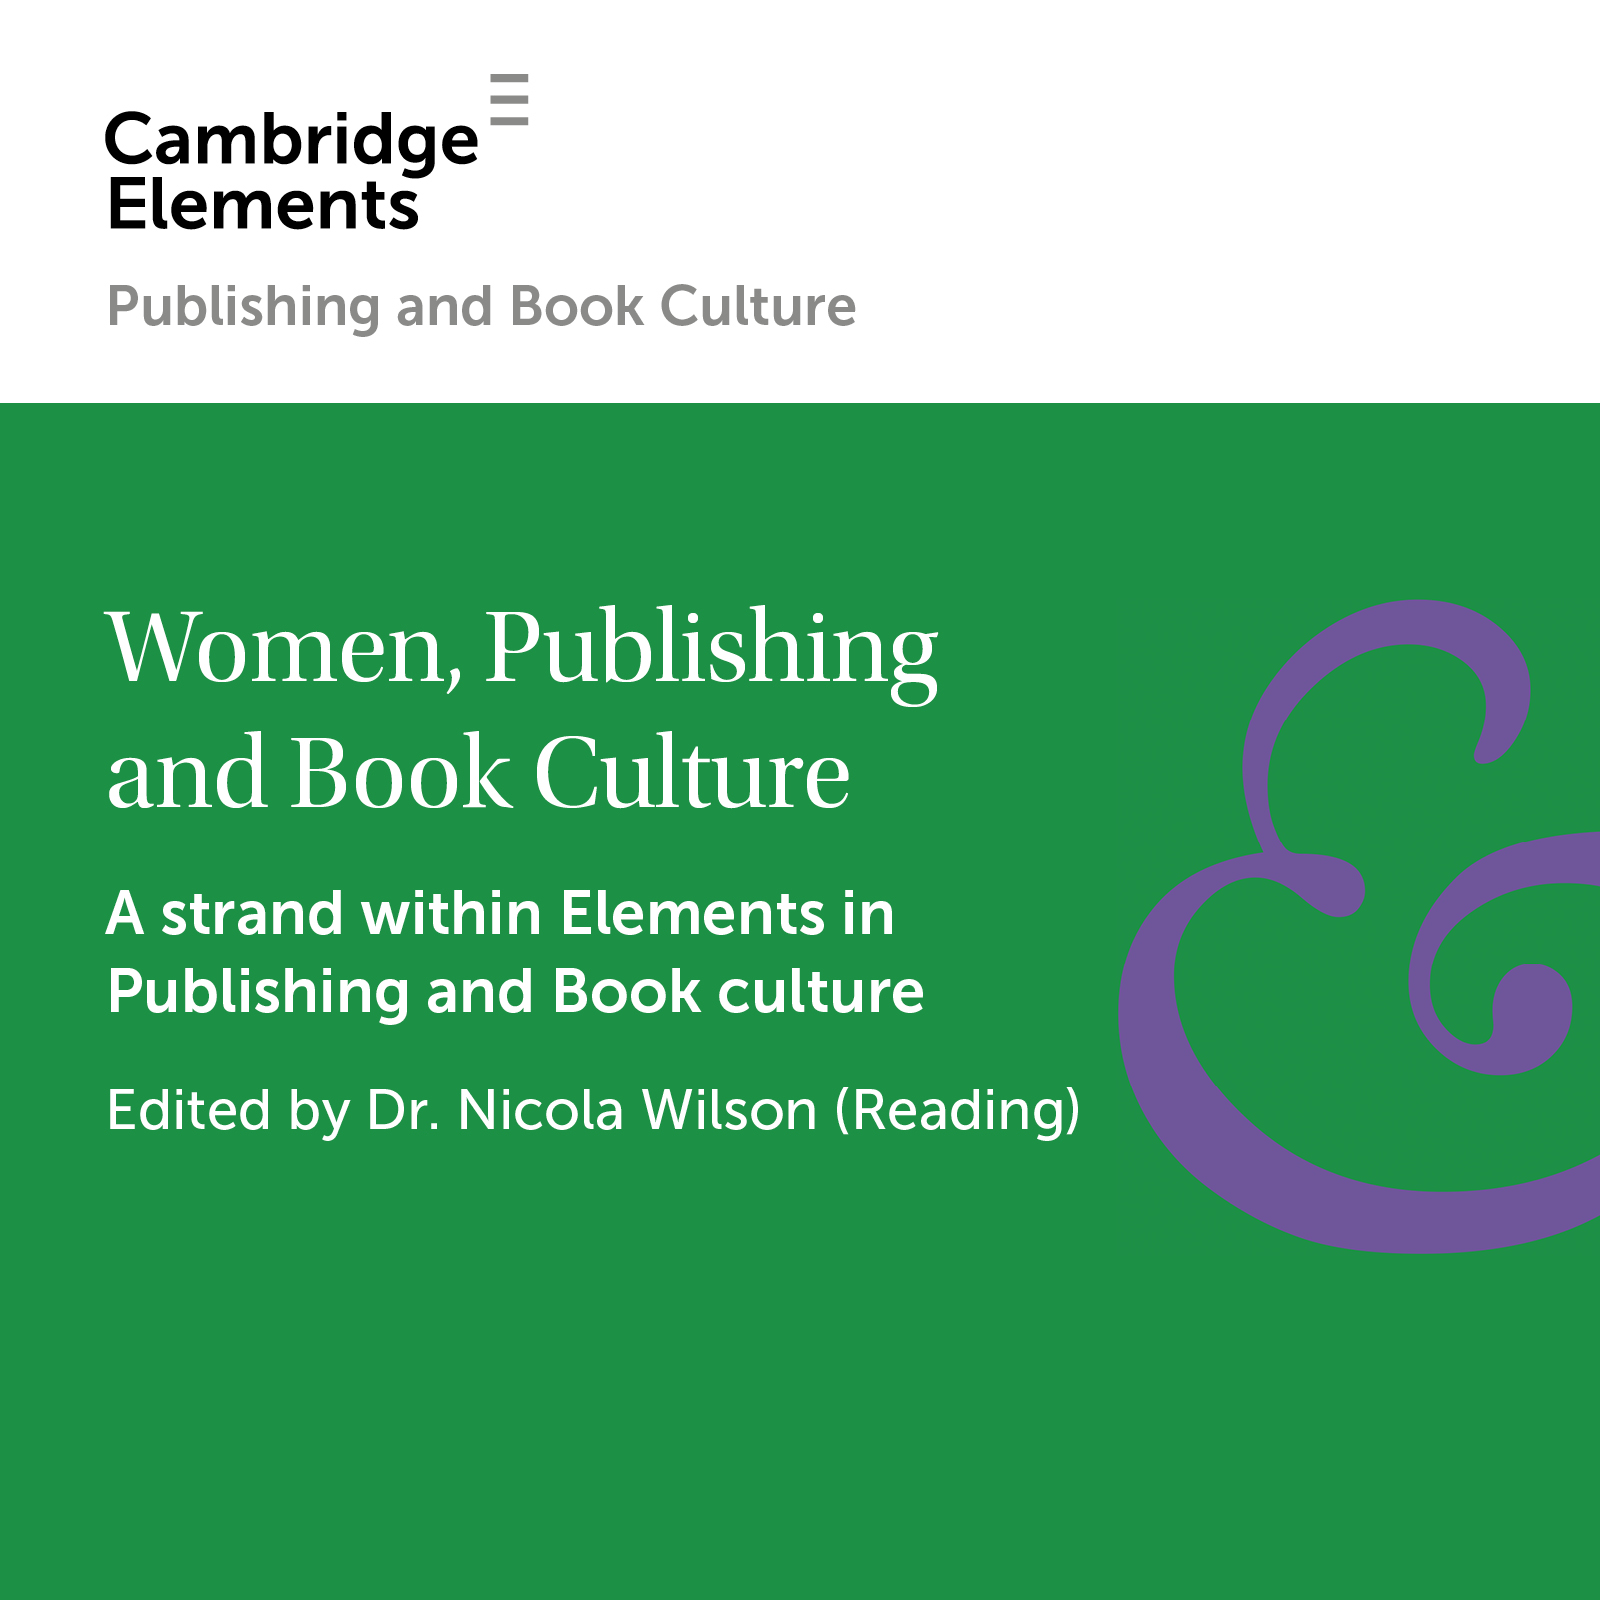 Women, Publishing and Book Culture